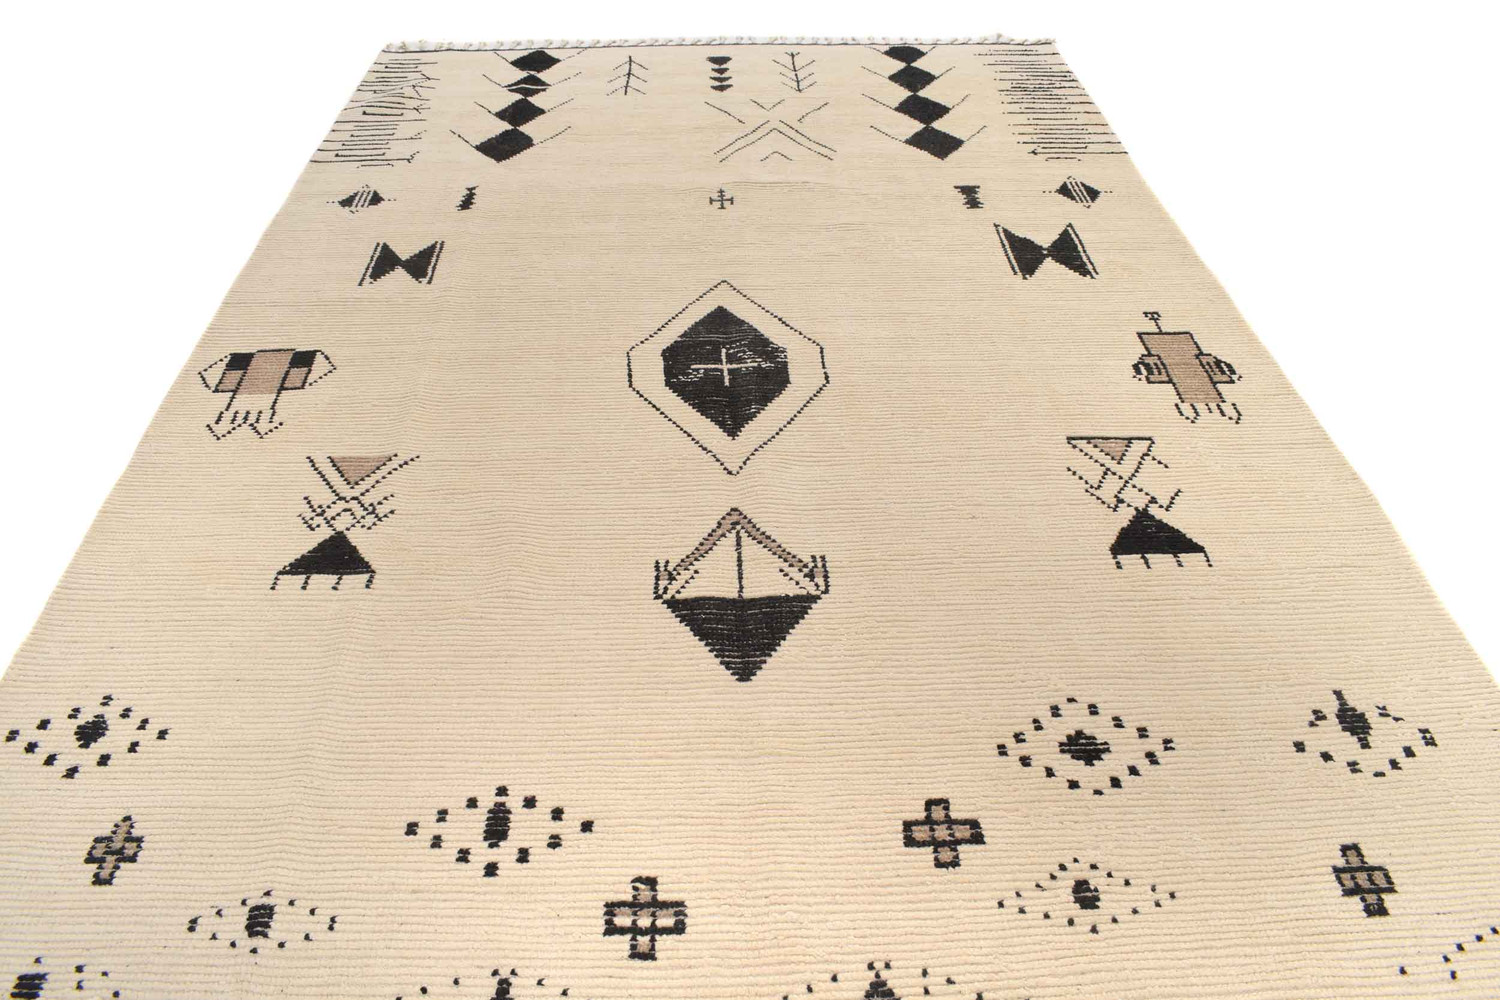 This image provides a full view of the Moroccan rug spread out on the floor. The rug's expansive size is evident, capable of anchoring a large room's furniture arrangement. The patterns are symmetrically distributed across the rug's surface, with smaller motifs filling the spaces between larger, more intricate designs. The texture of the rug is visible, suggesting a thick pile and a soft underfoot feel. The color contrast and pattern symmetry make this rug an eye-catching element in any space.